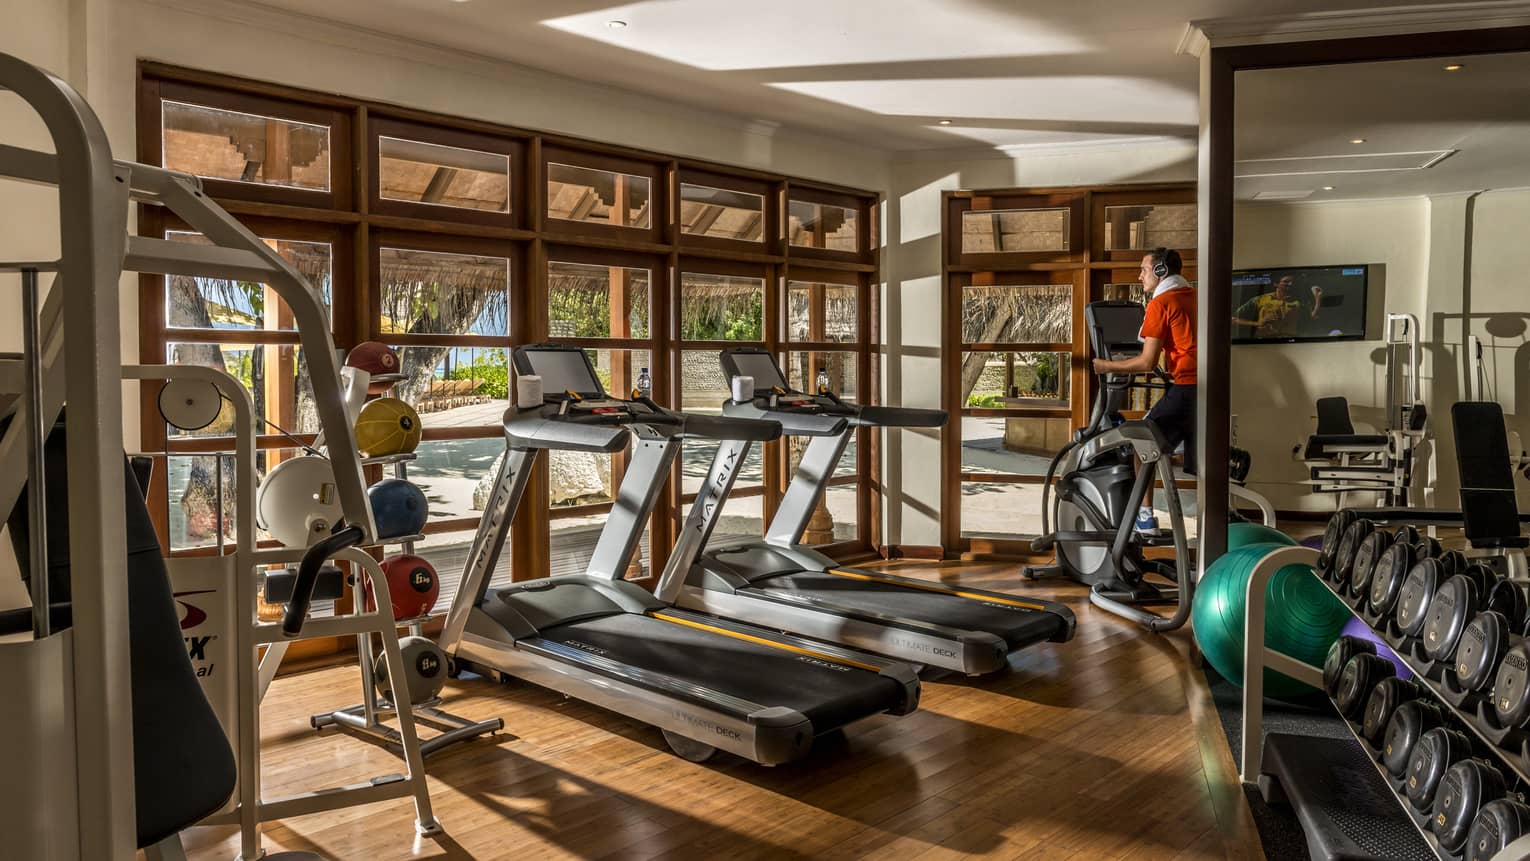 Gym with wooden floors, two treadmills, person on elliptical, free wights, windows looking out to beach